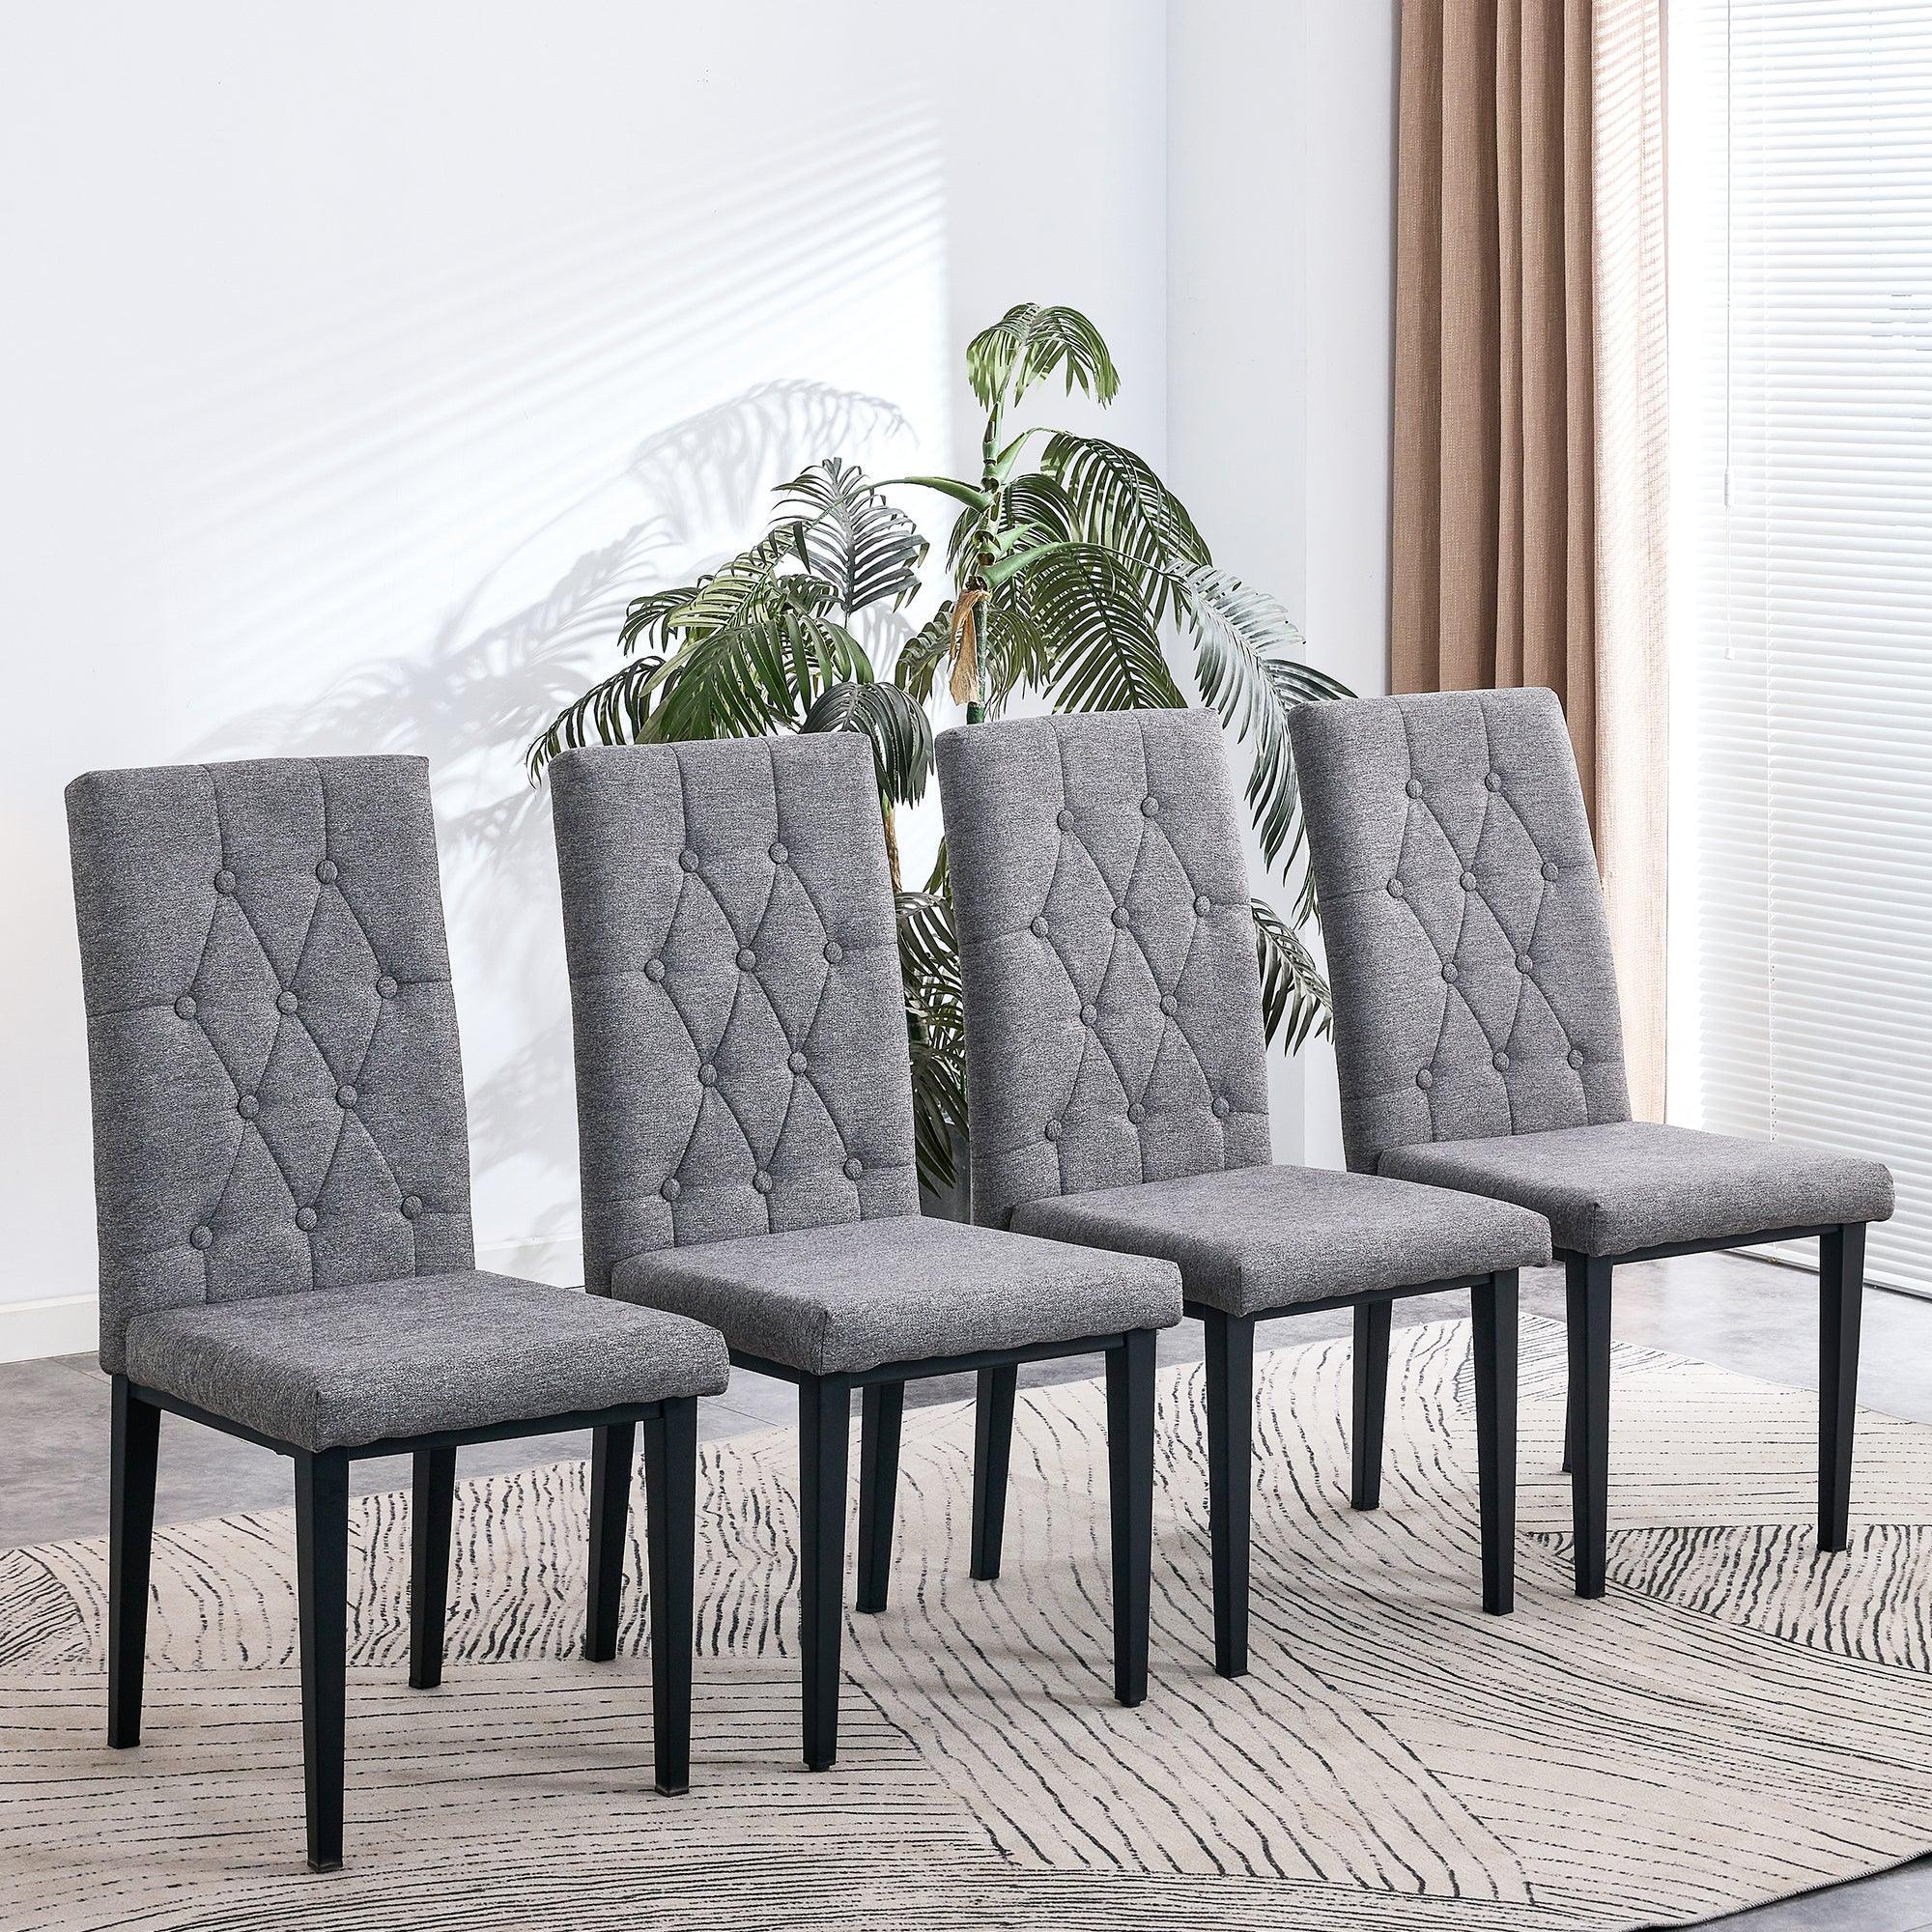 🆓🚛 Linen Tufted Dining Room Chairs Set Of 4, Accent Diner Chairs Upholstered Fabric Side Stylish Kitchen Chairs With Metal Legs & Padded Seat - Gray